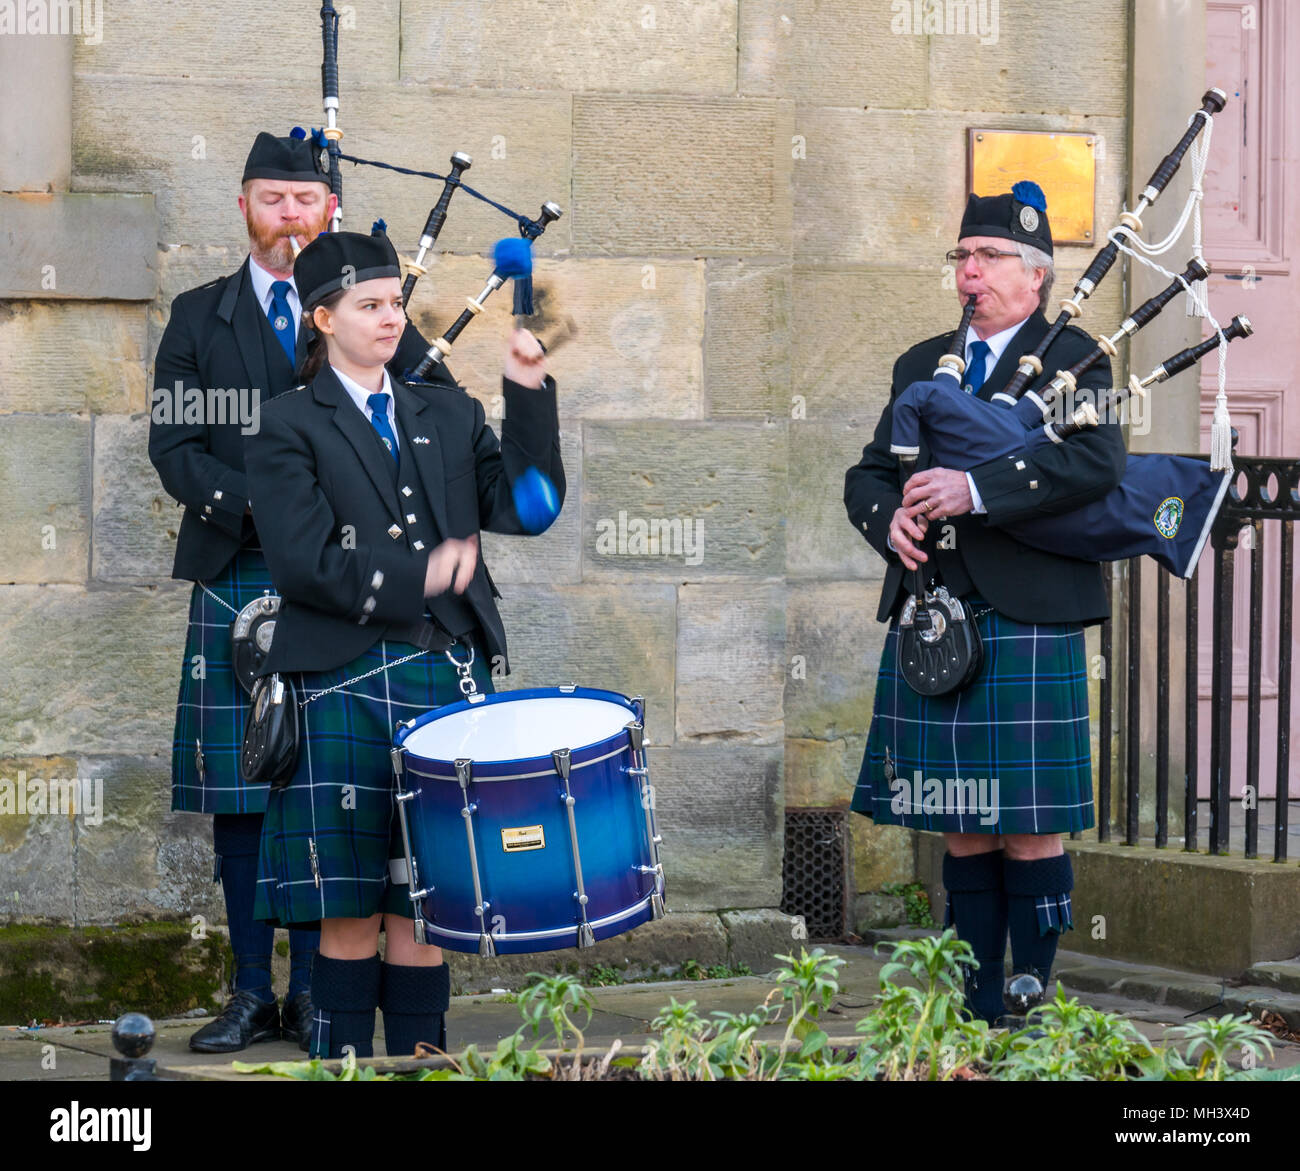 Drummer and bagpipe players, Haddington Pipe Band dressed in kilts, Corn Exchange, Place d'Aubigny, Court Street, East Lothian, Scotland, UK Stock Photo